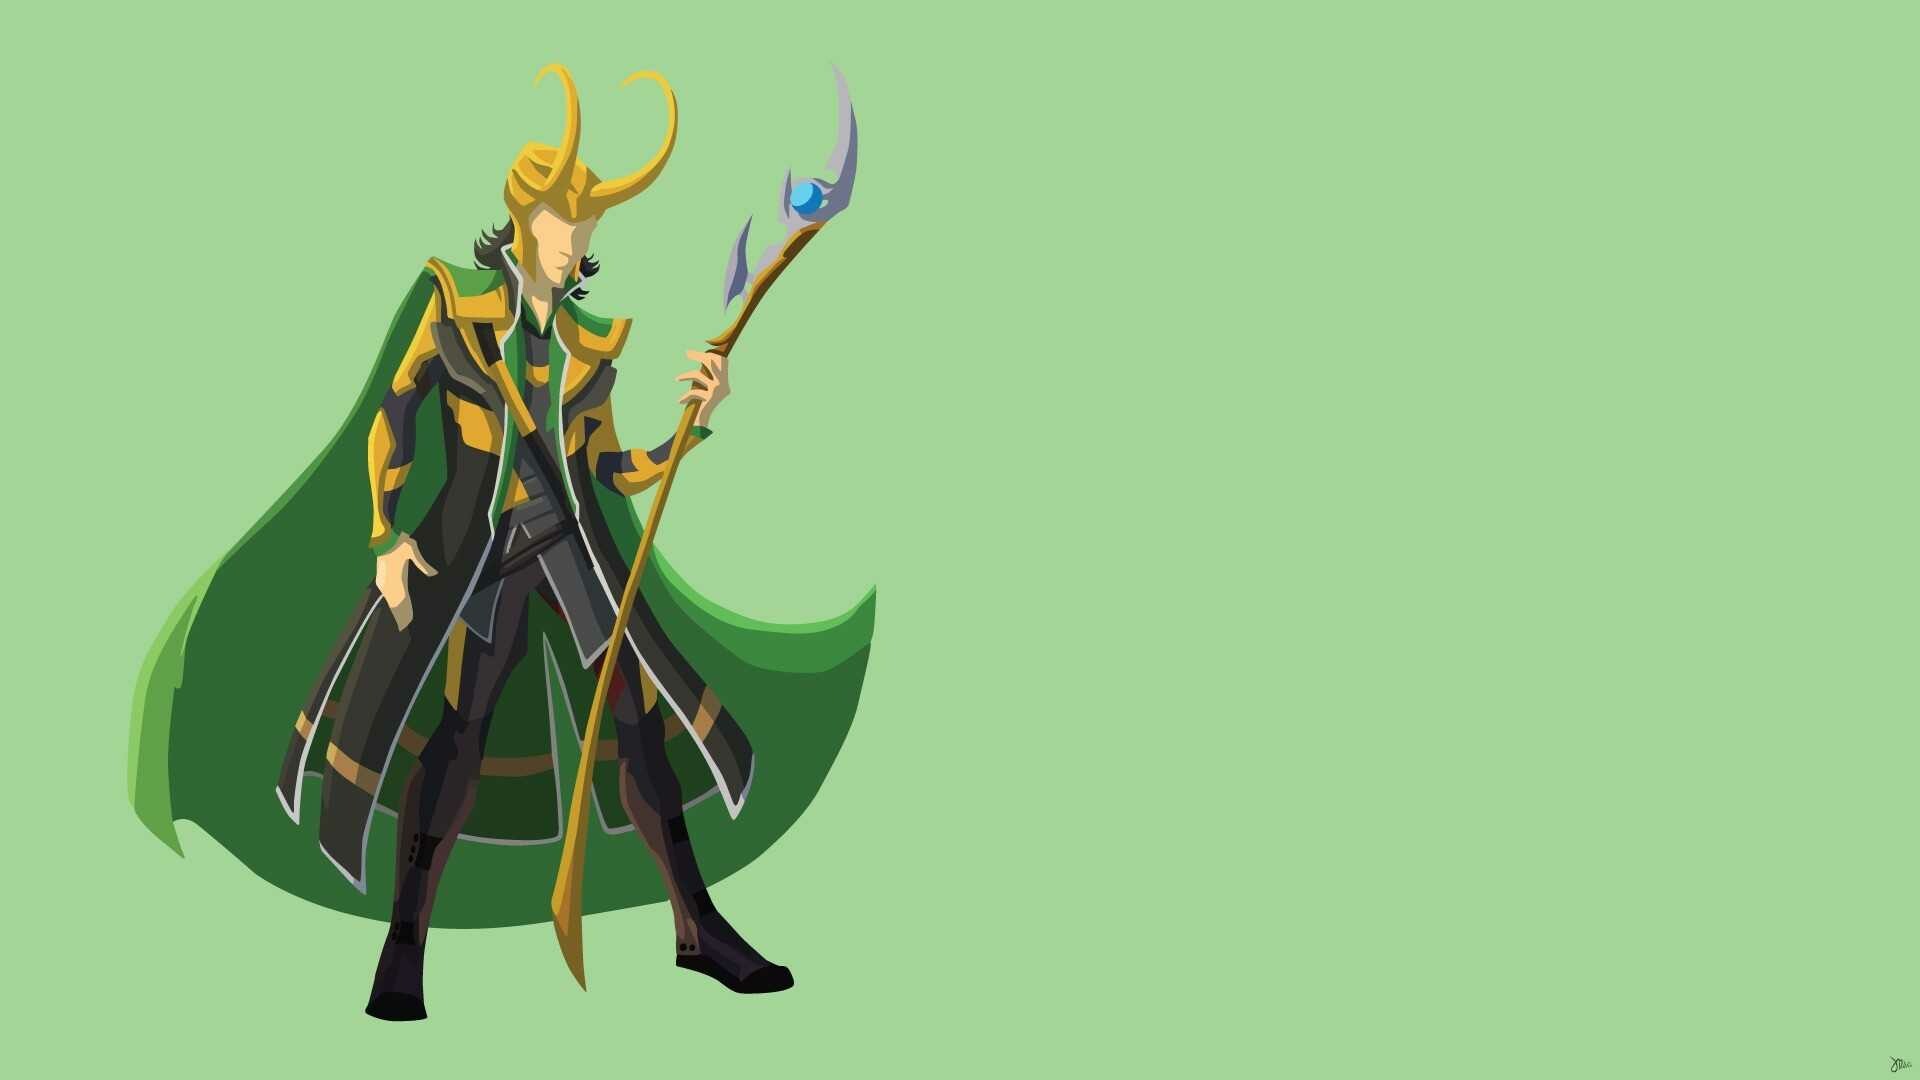 Loki (TV Series): Raised by Odin and Frigga as an Asgardian prince, along with Thor. 1920x1080 Full HD Wallpaper.